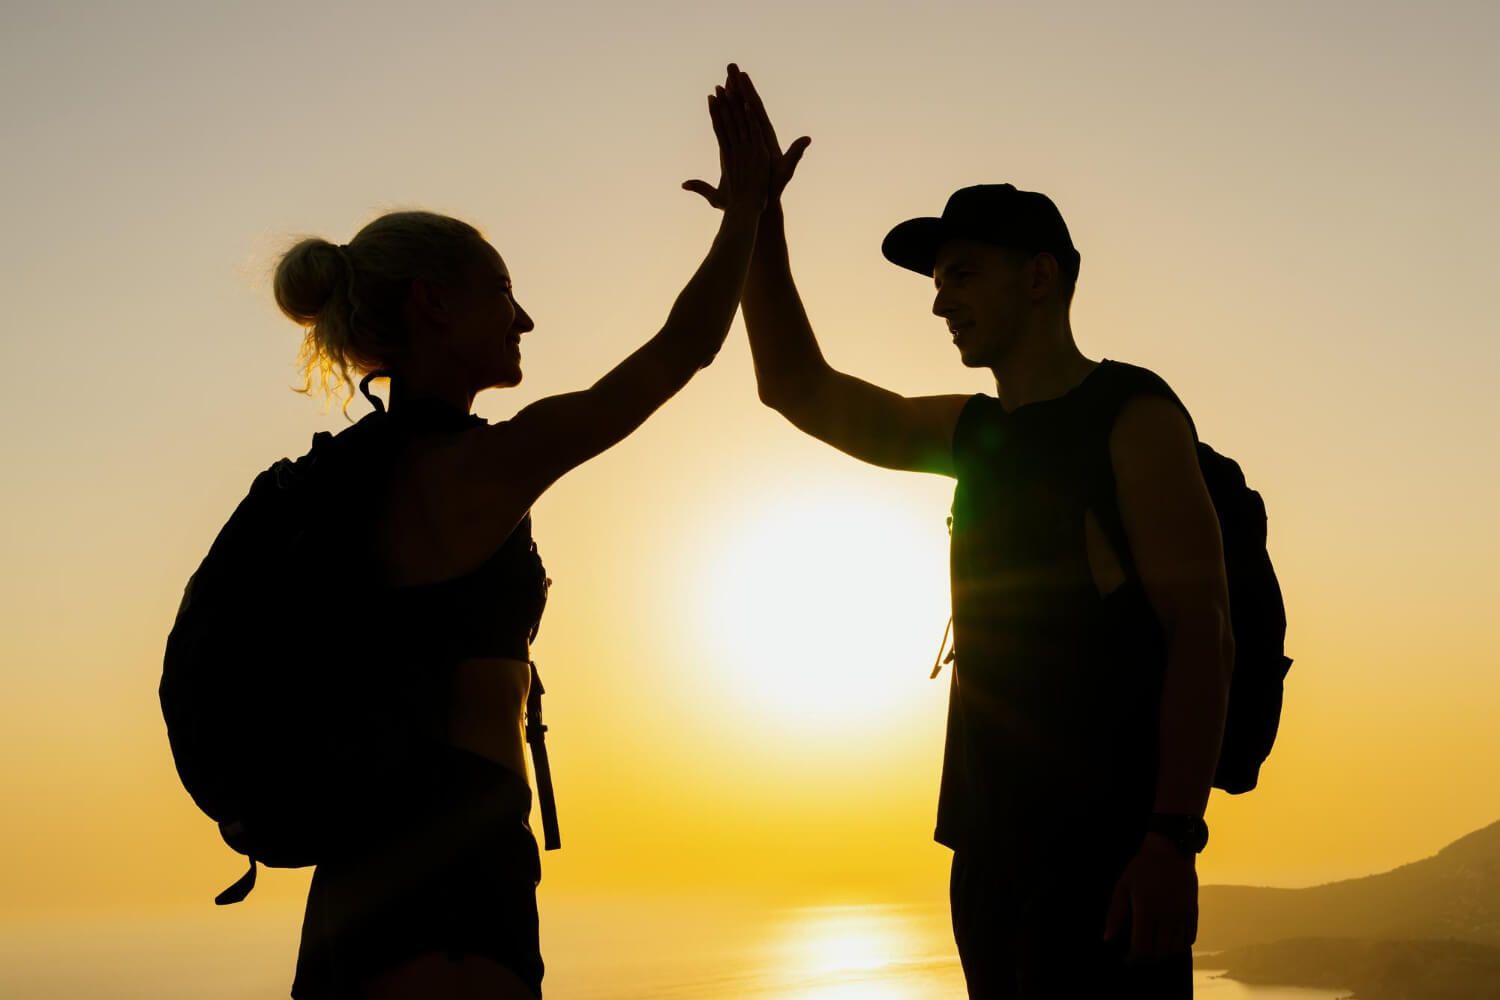 Silhouette of two people holding hands at sunset.jpg